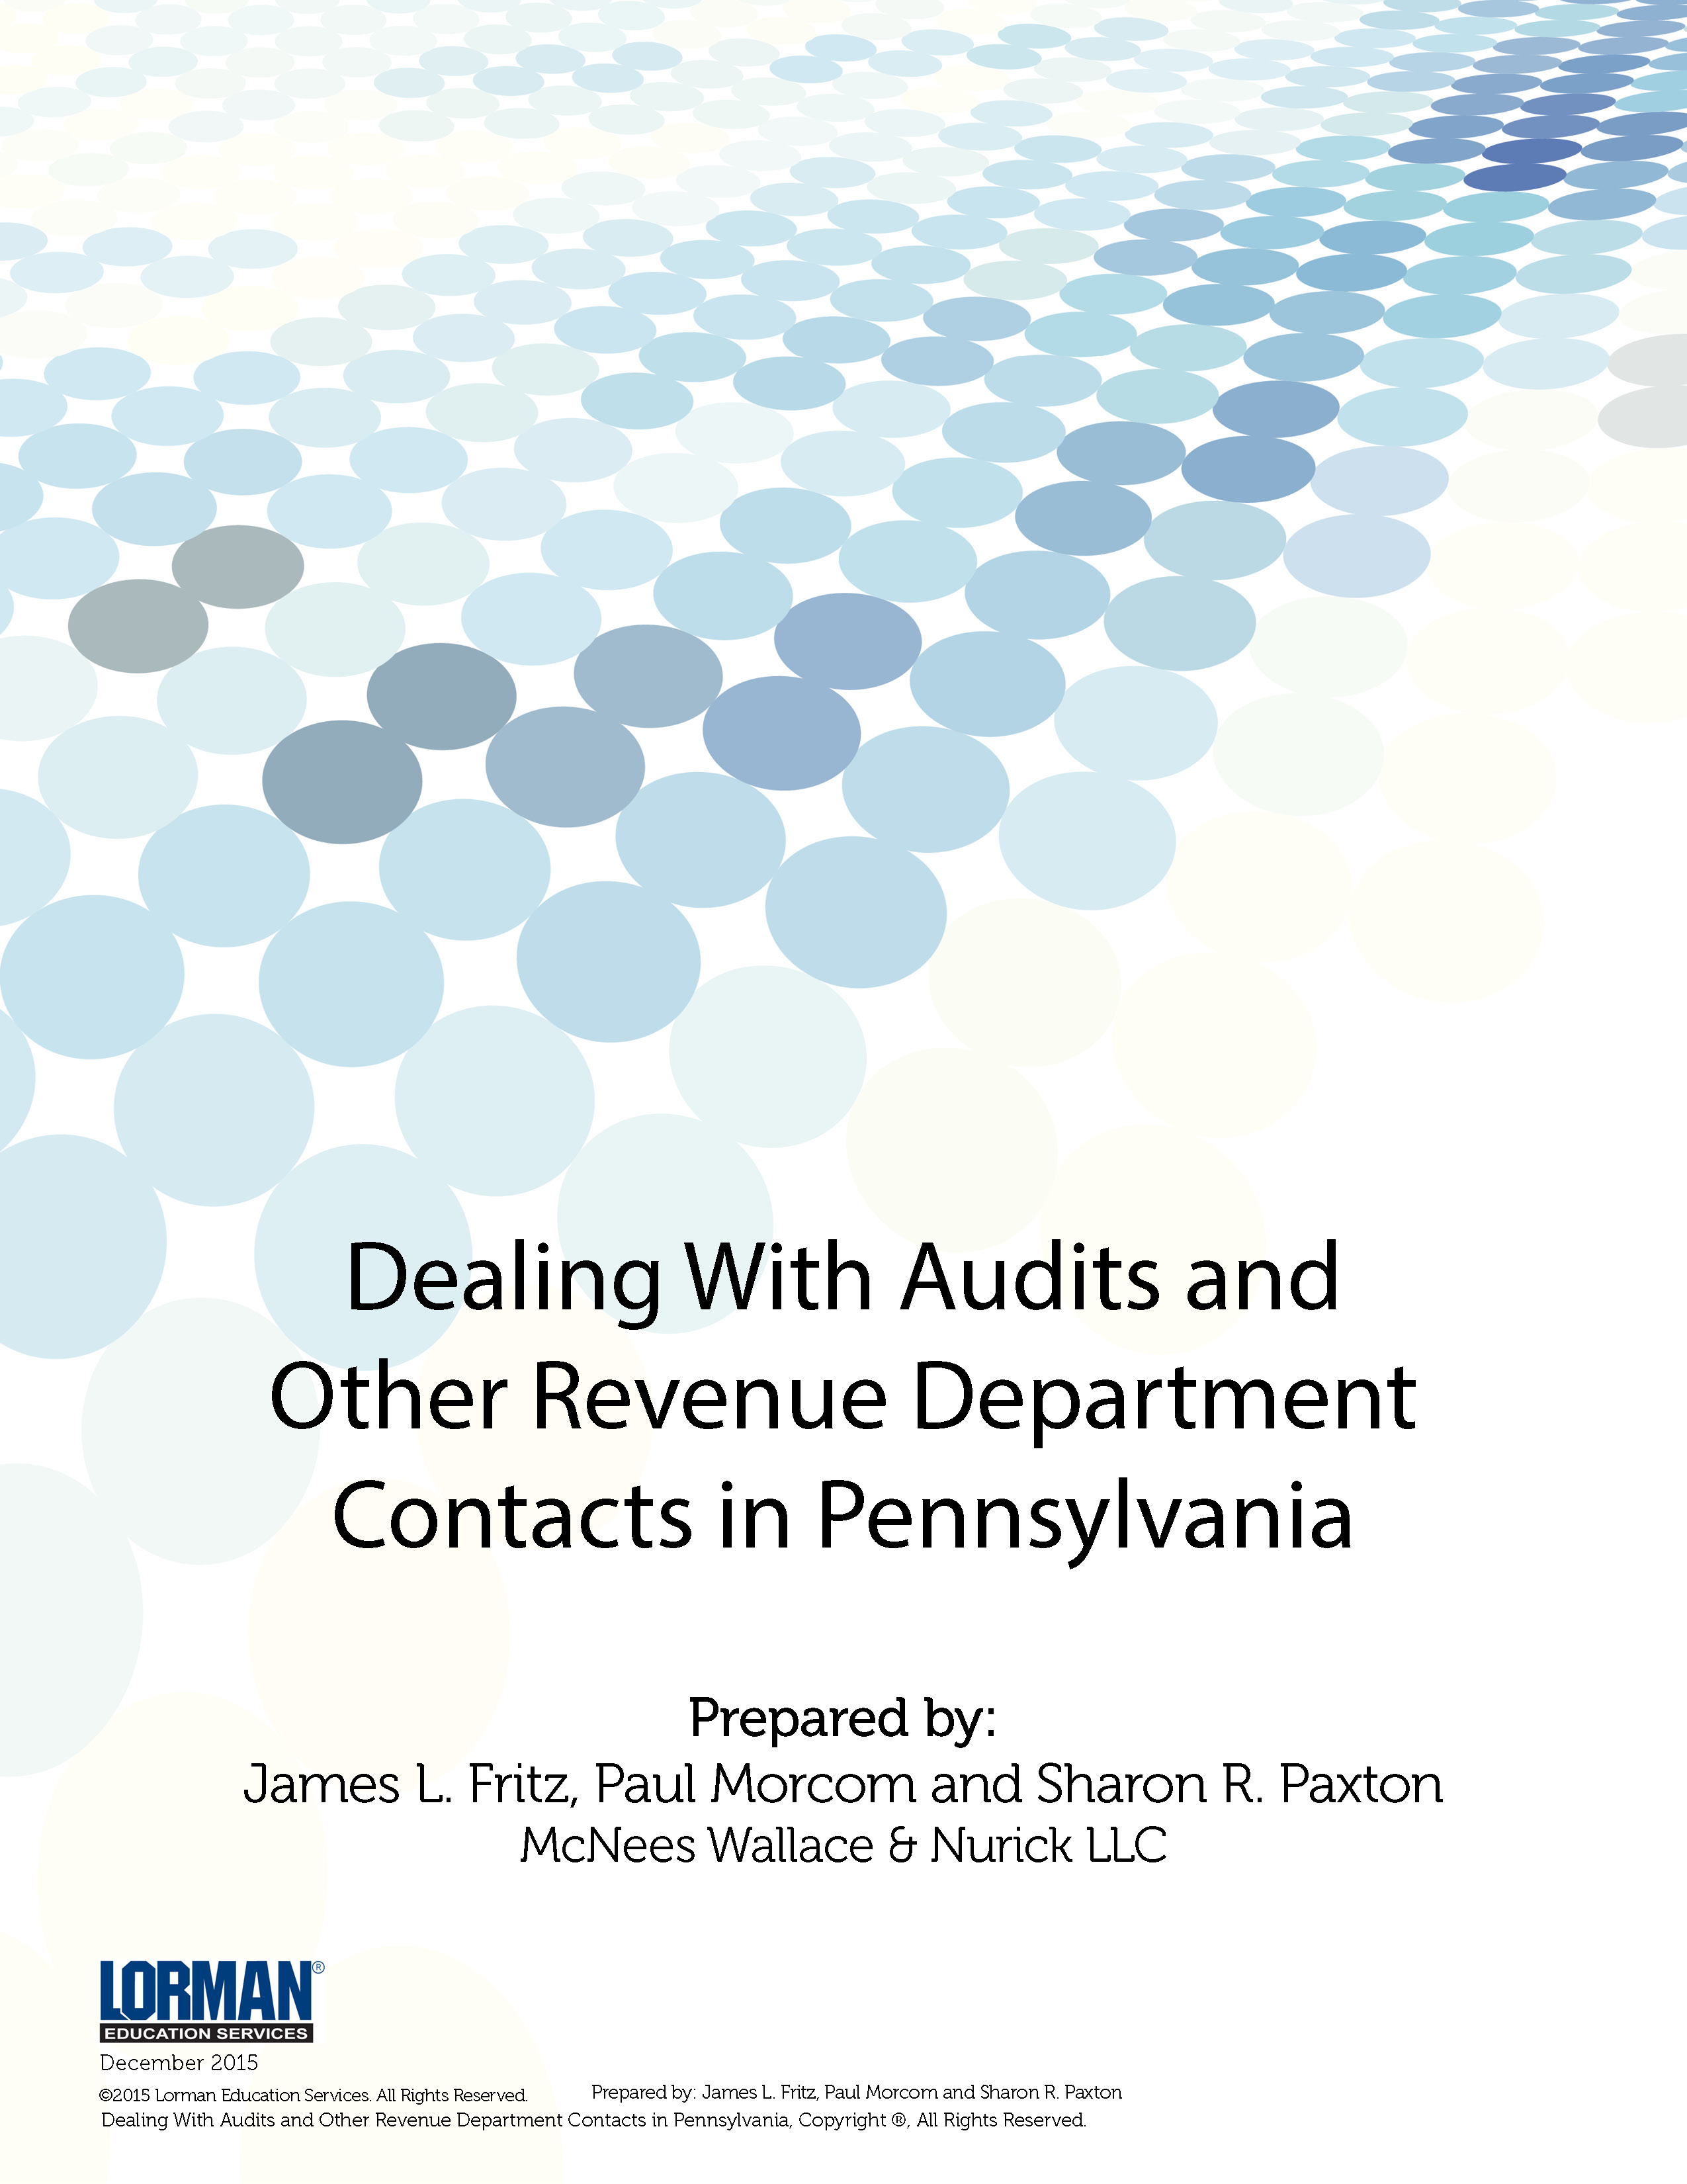 Dealing With Audits and Other Revenue Department Contacts in Pennsylvania